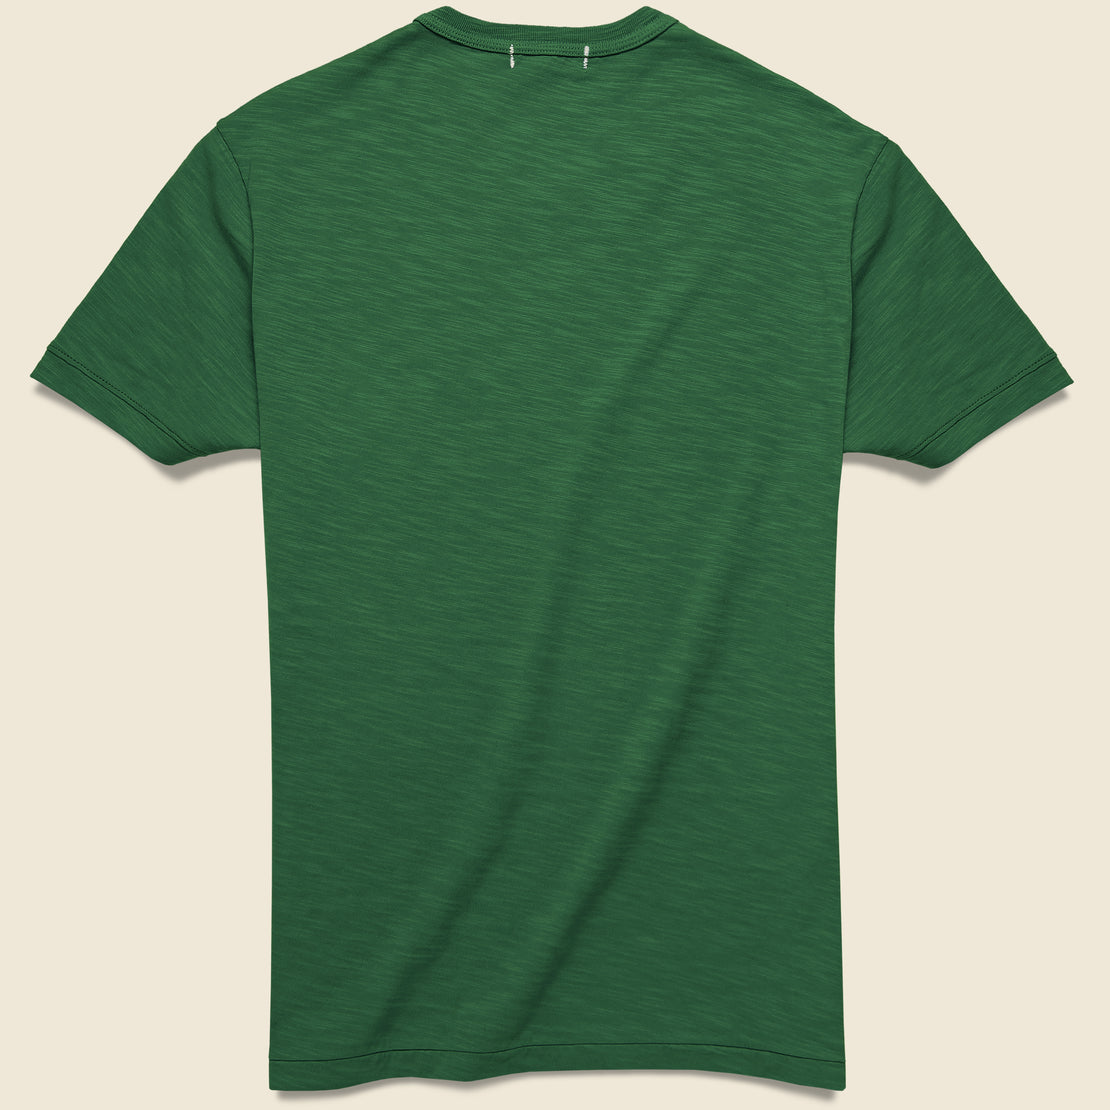 Standard Crew Tee - Emerald - Alex Mill - STAG Provisions - Tops - S/S Tee